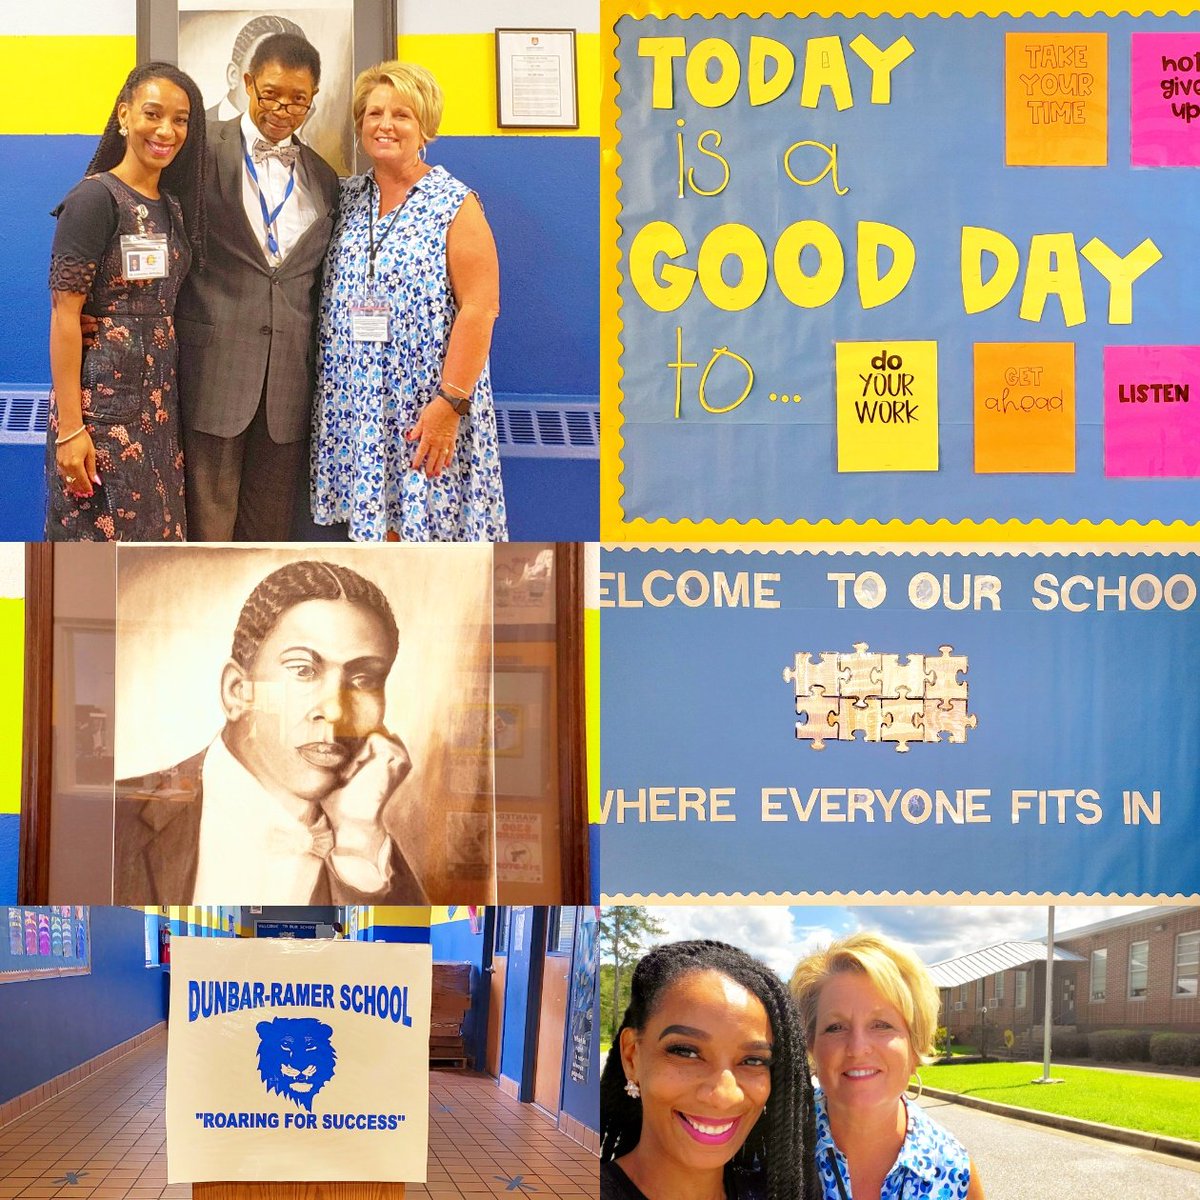 EXCELLENT day w/ Dr. Owens & @WendyArnold at Dunbar-Ramer School!  THANK YOU for your southern hospitality Dr. Owens. So looking forward to serving the NEW 'Come Back Kids'!😎 We GOT THIS @mjshields @ALSDEOSI @AlabamaAchieves! 🙌🏾💪🏾🤗#WatchUsWork  #AllorNothing #ComeBackKids